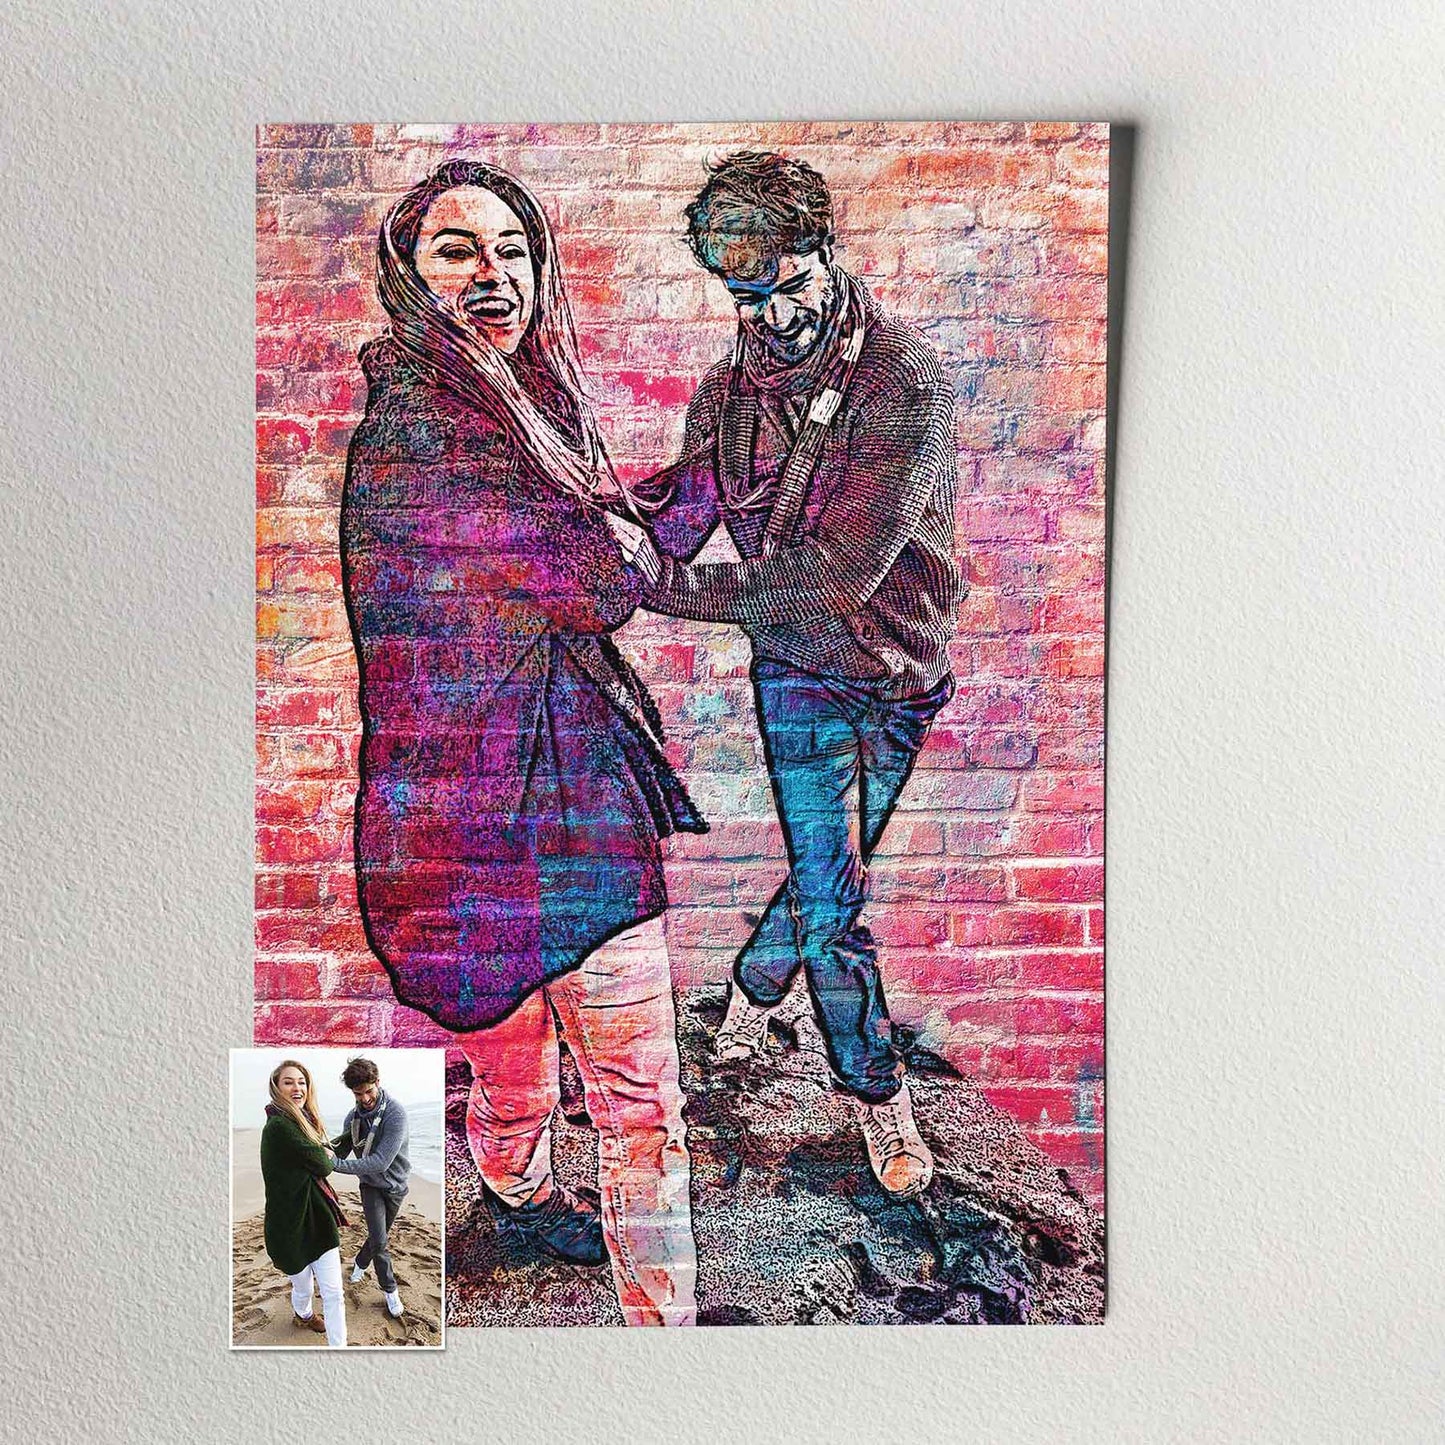 Creative and Original: Stand out from the crowd with this personalised brick graffiti street art print. Its unique style and original design make it a creative masterpiece that sparks imagination. Whether as a gift or for your own decor